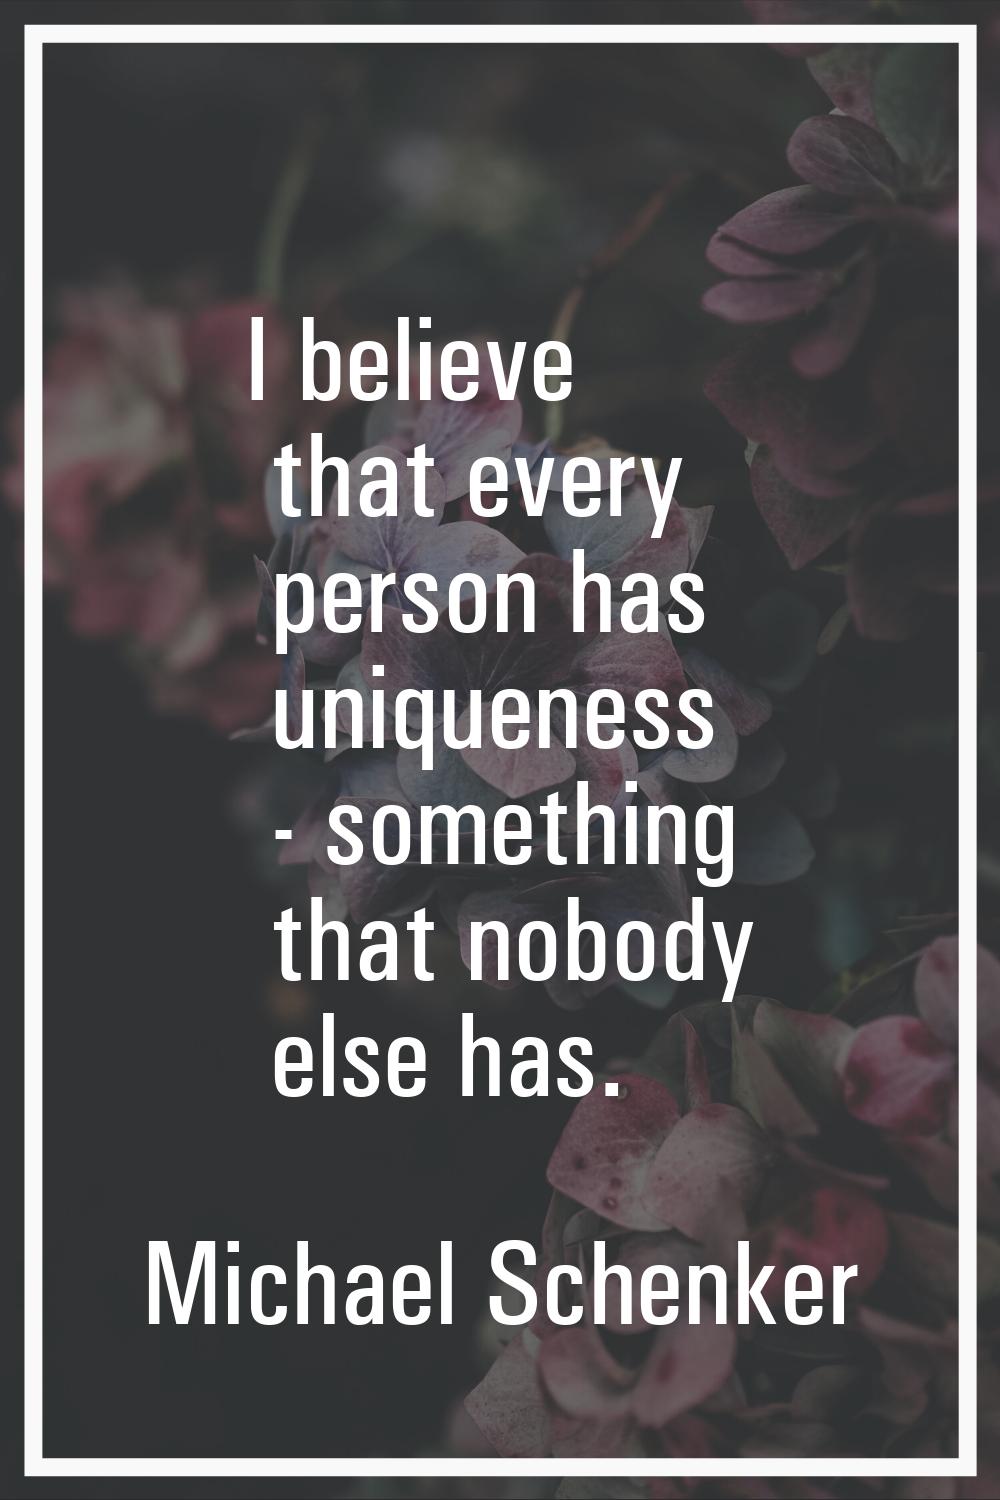 I believe that every person has uniqueness - something that nobody else has.